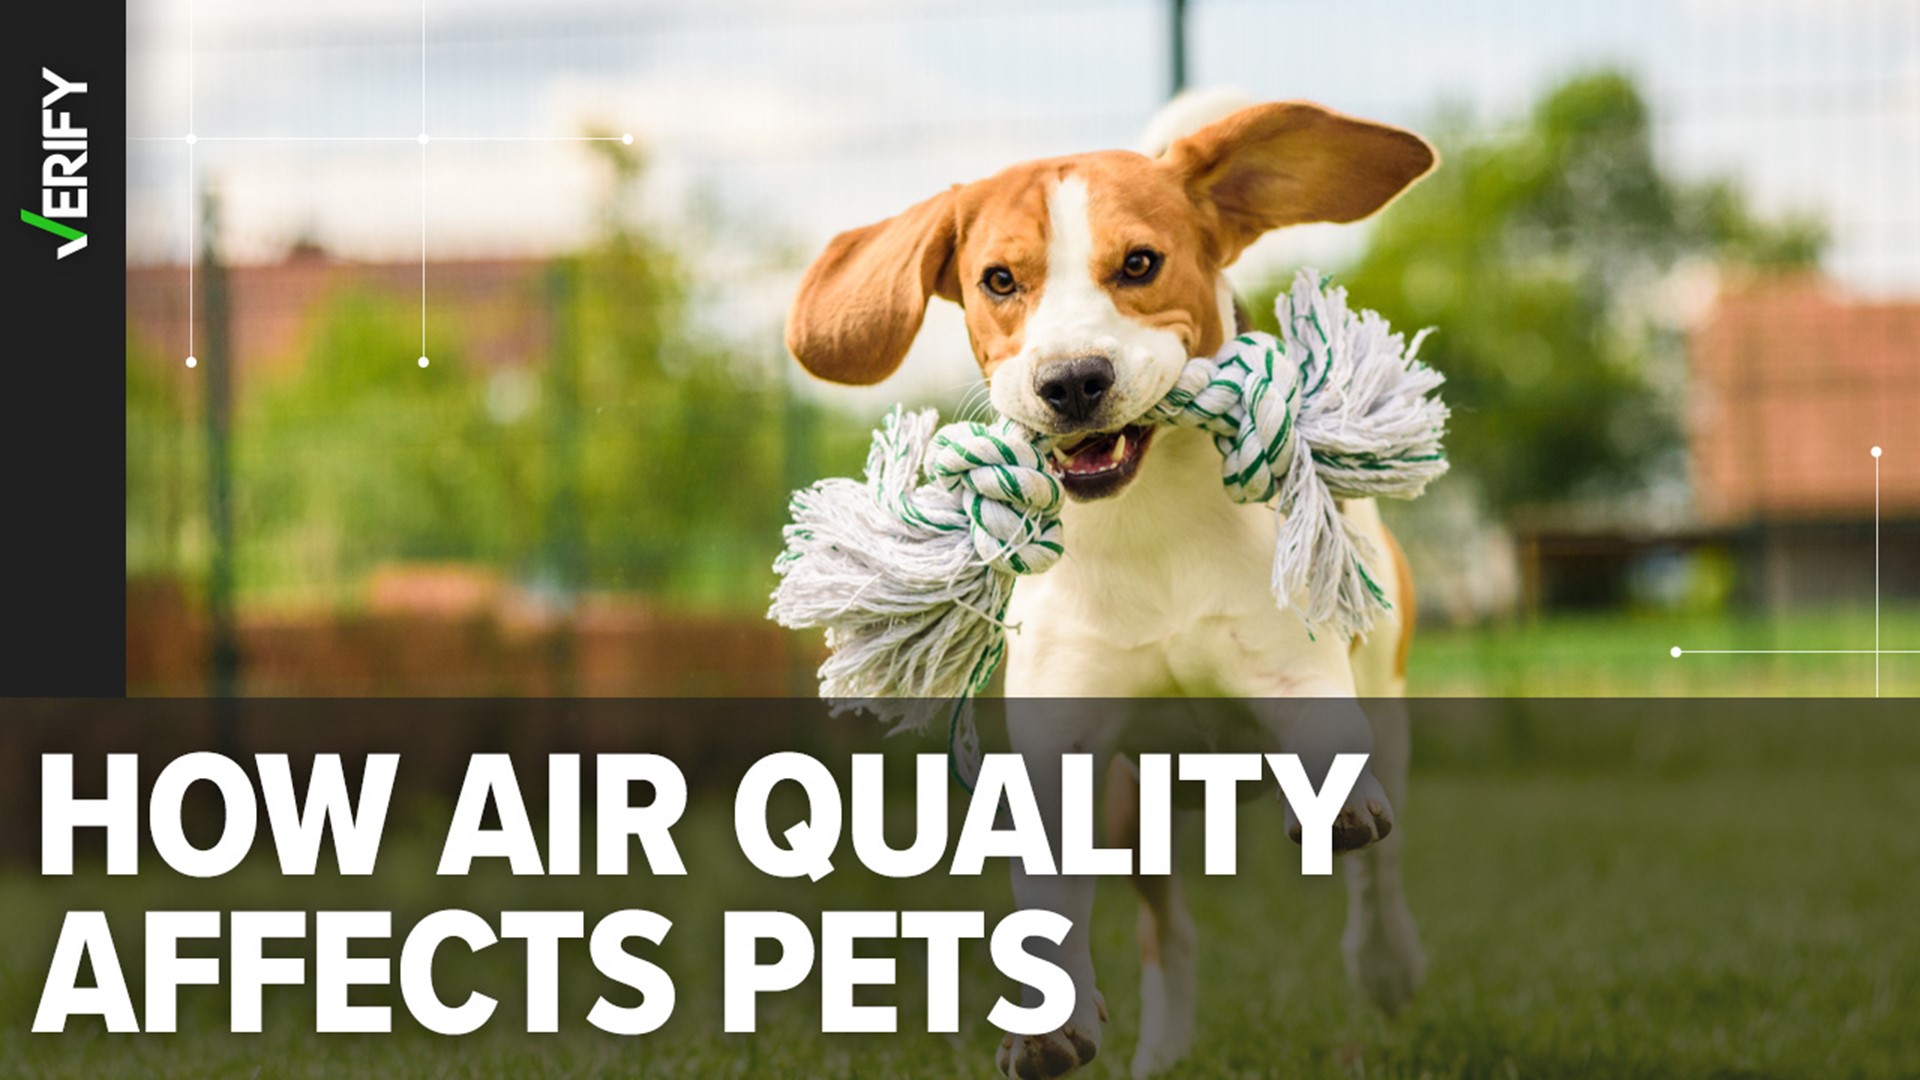 Poor air quality can irritate your pet’s eyes and respiratory tract. We VERIFY ways you can keep your pet safe from wildfire smoke inside and outside of your home.